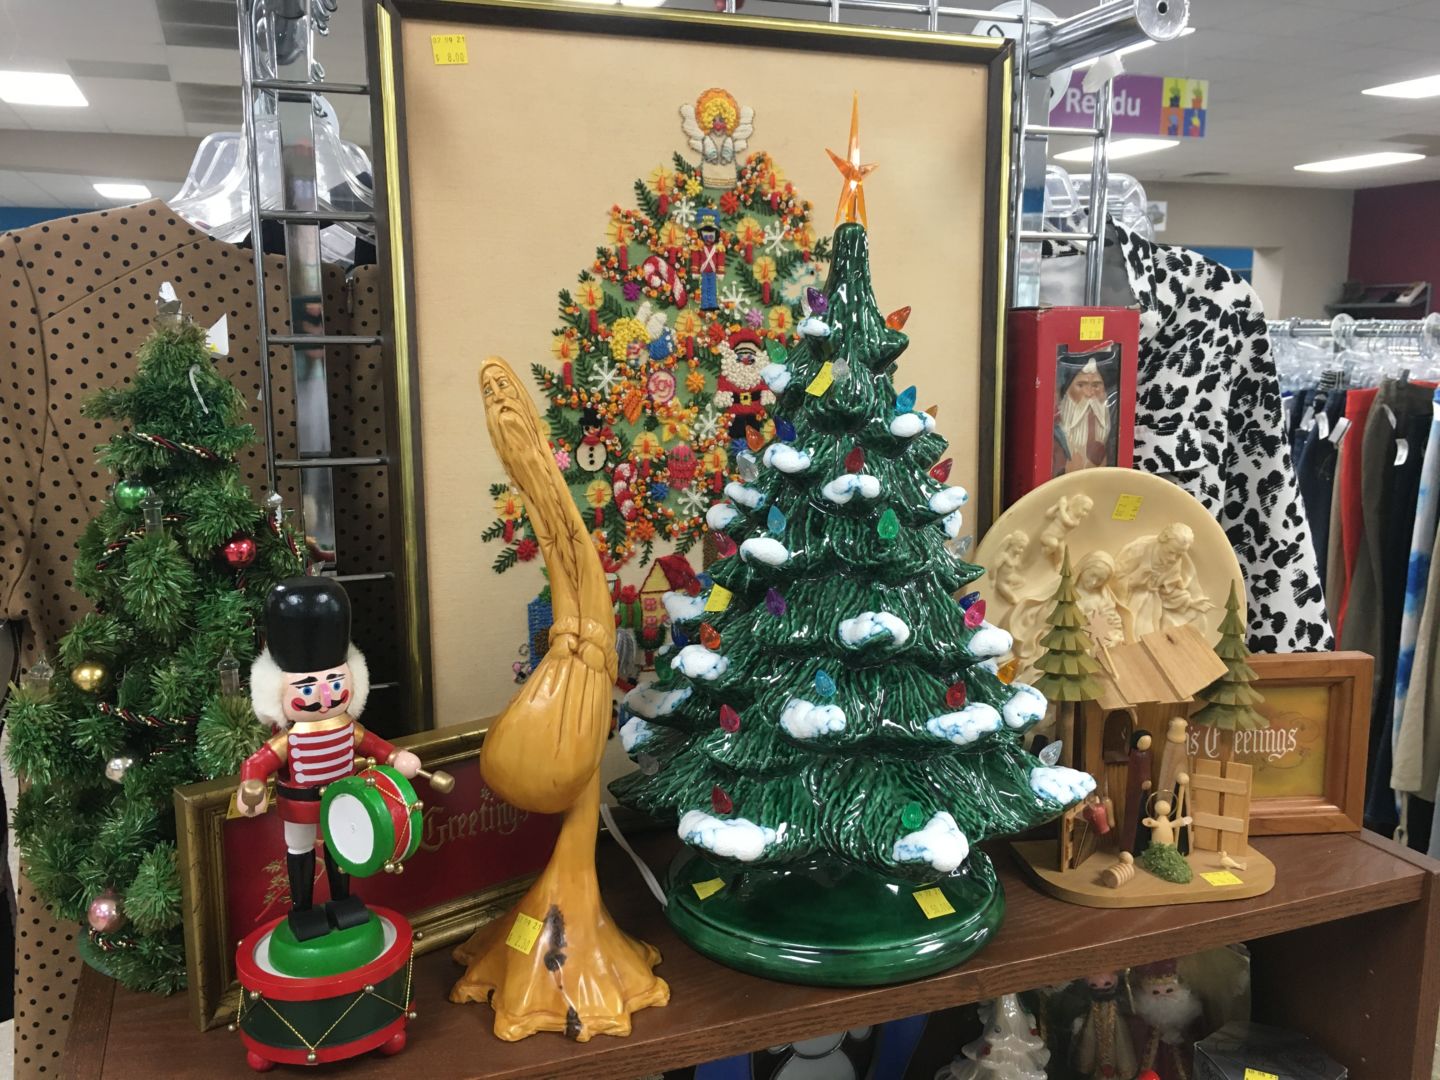 A collection of vintage/collectible Christmas décor. There is a picture of a Christmas tree and two ceramic trees, a small nutcracker, and a Santa Clause figurine.